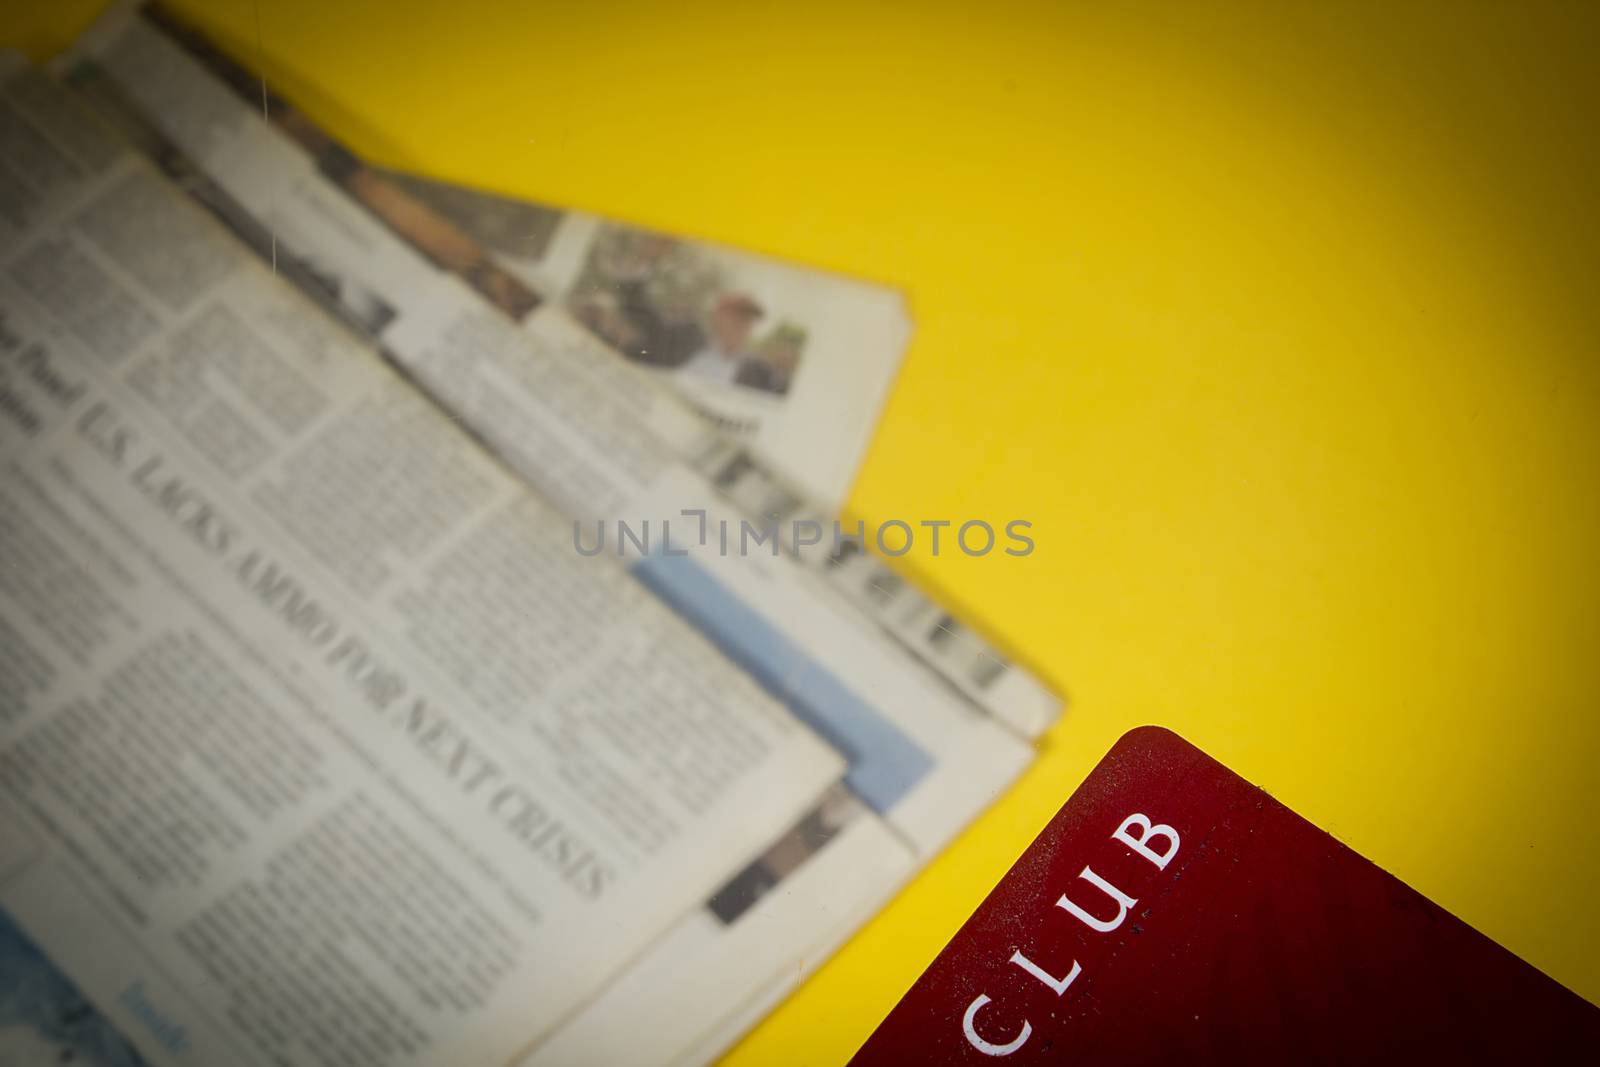 Club card on the background of newspapers